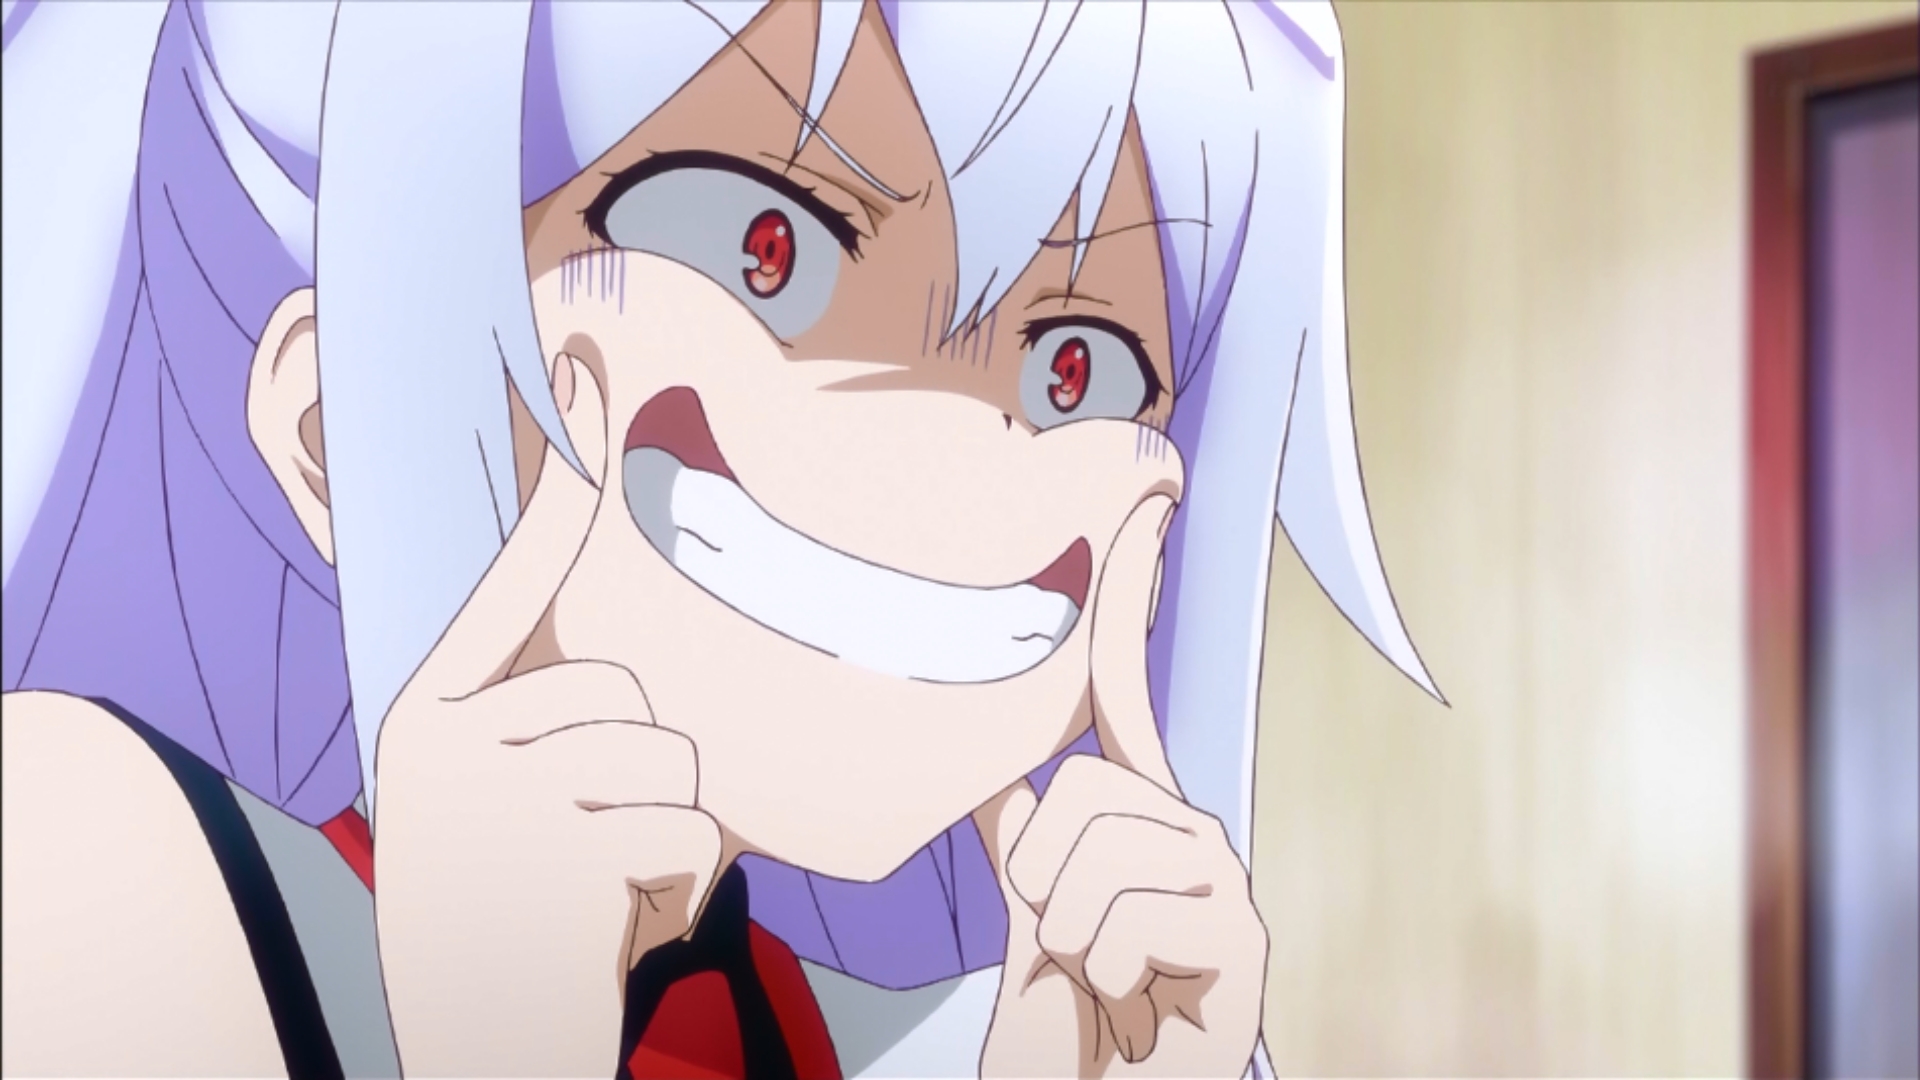 Plastic Memories Episode 4 Anime Review - The Feels Are Back